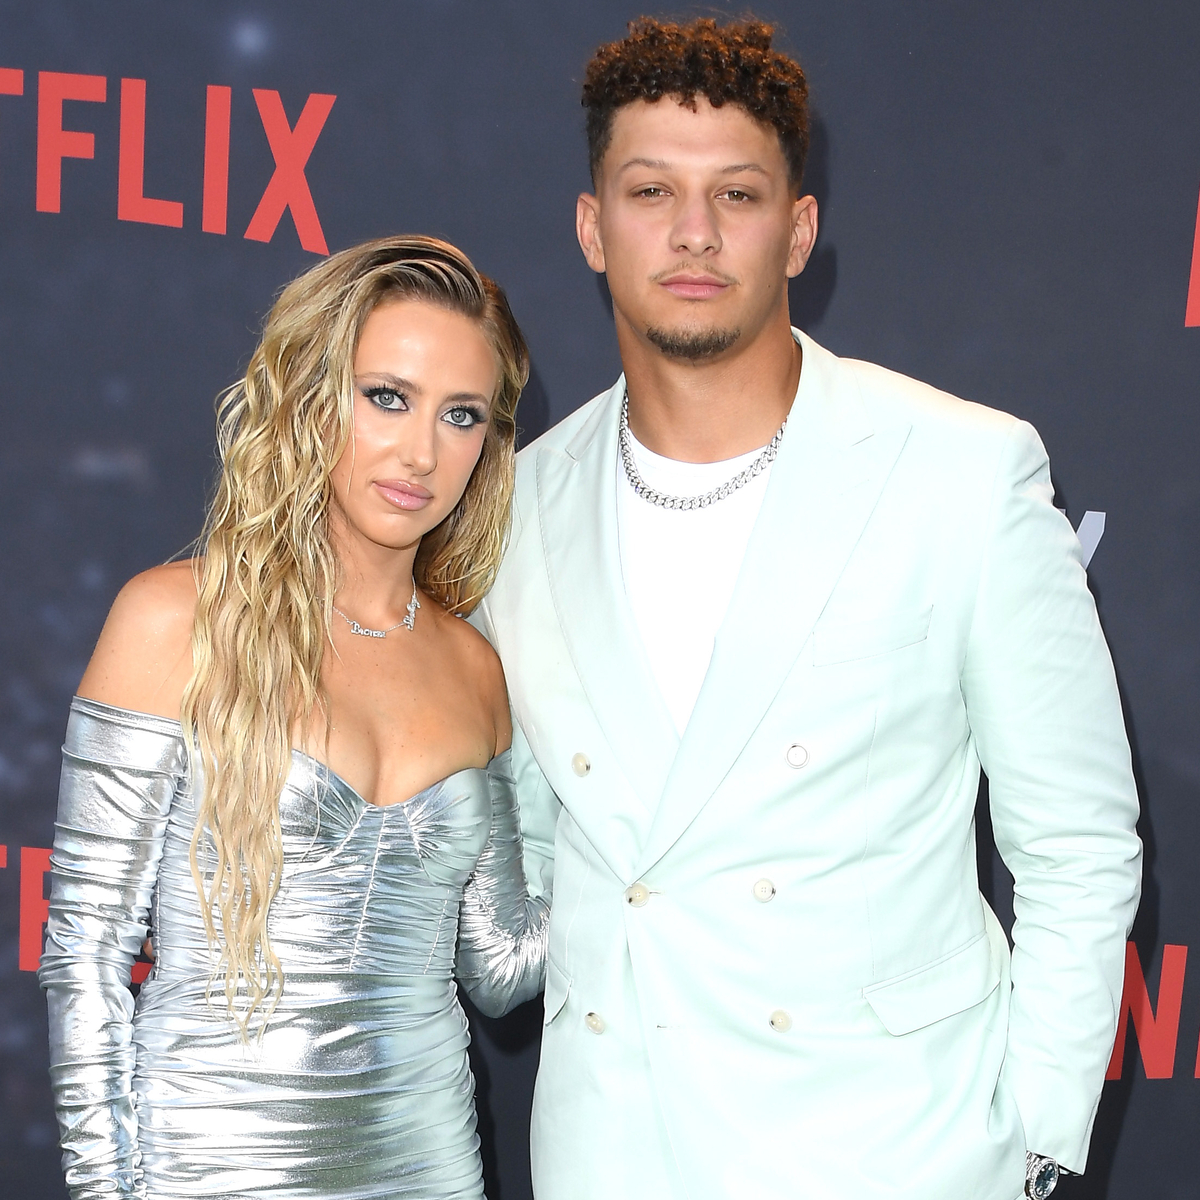 Patrick Mahomes' Wife Brittany Mahomes Fractures Her Back